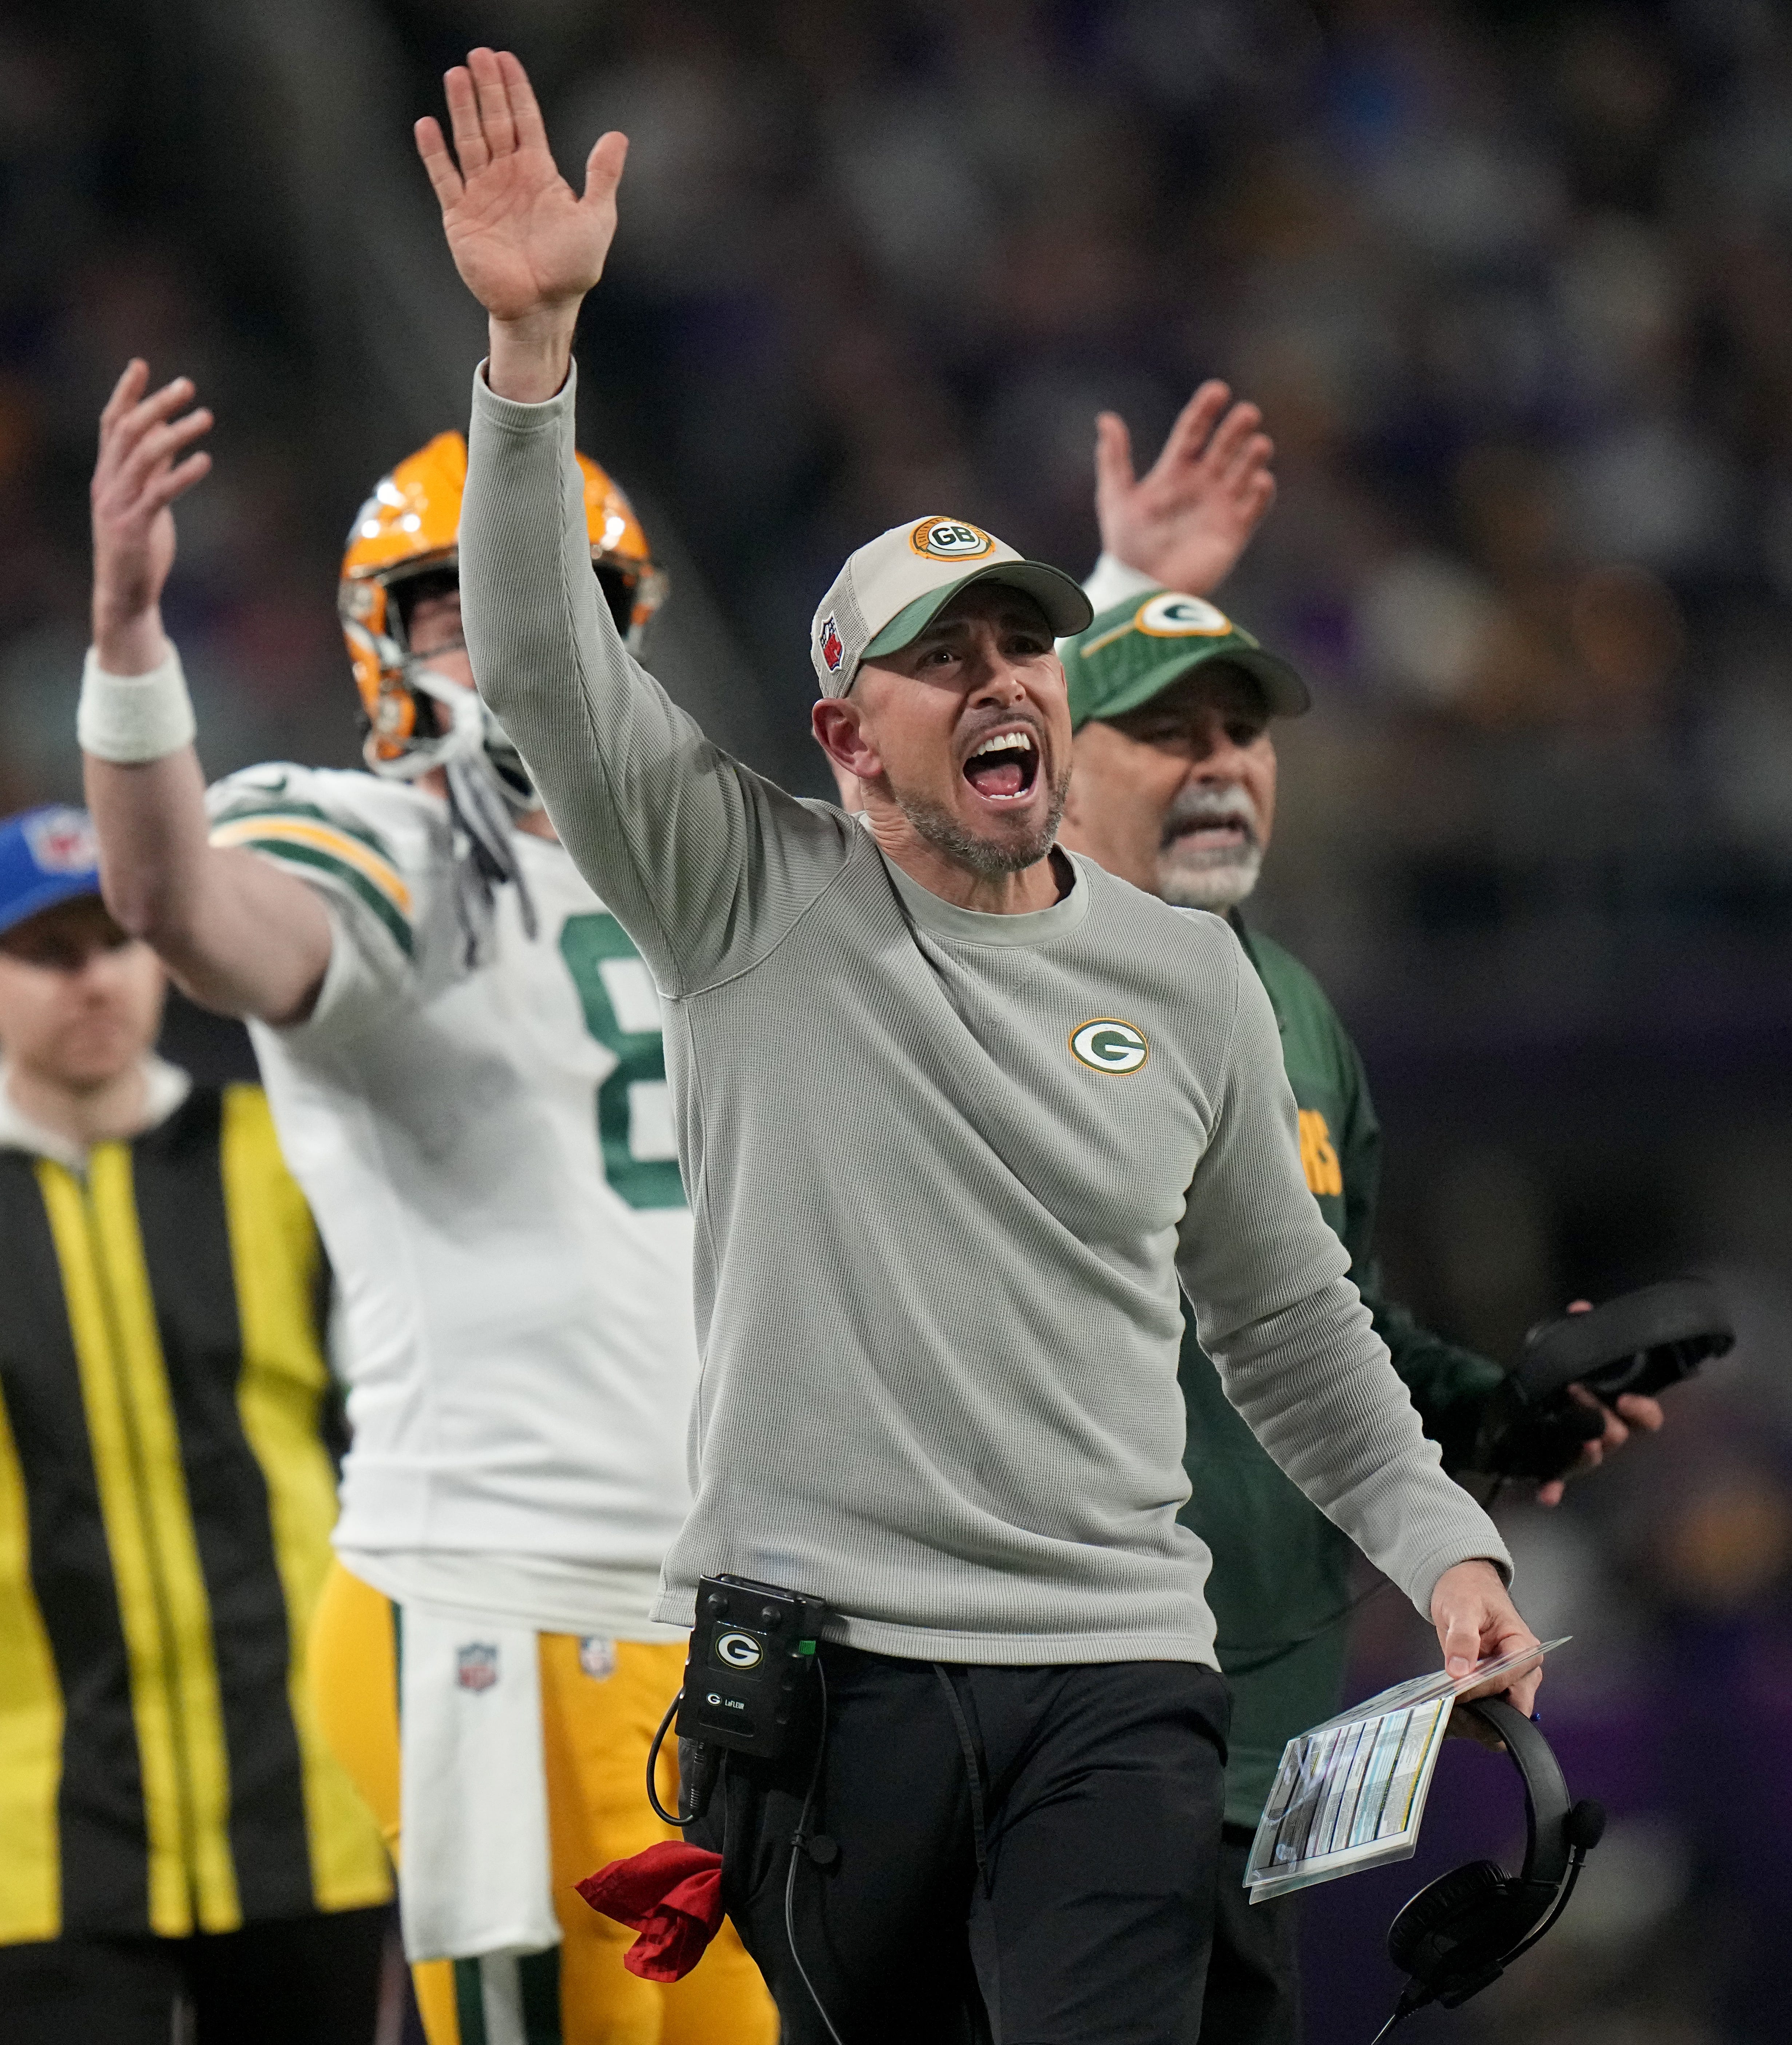 Green Bay Packers head coach Matt LaFleur unsuccessfully lobbied for a penalty on the Minnesota Vikings during the second quarter of their game Sunday, December 31, 2023 at U.S. Bank Stadium in Minneapolis, Minnesota. The Green Bay Packers beat the Minnesota Vikings 33-10.